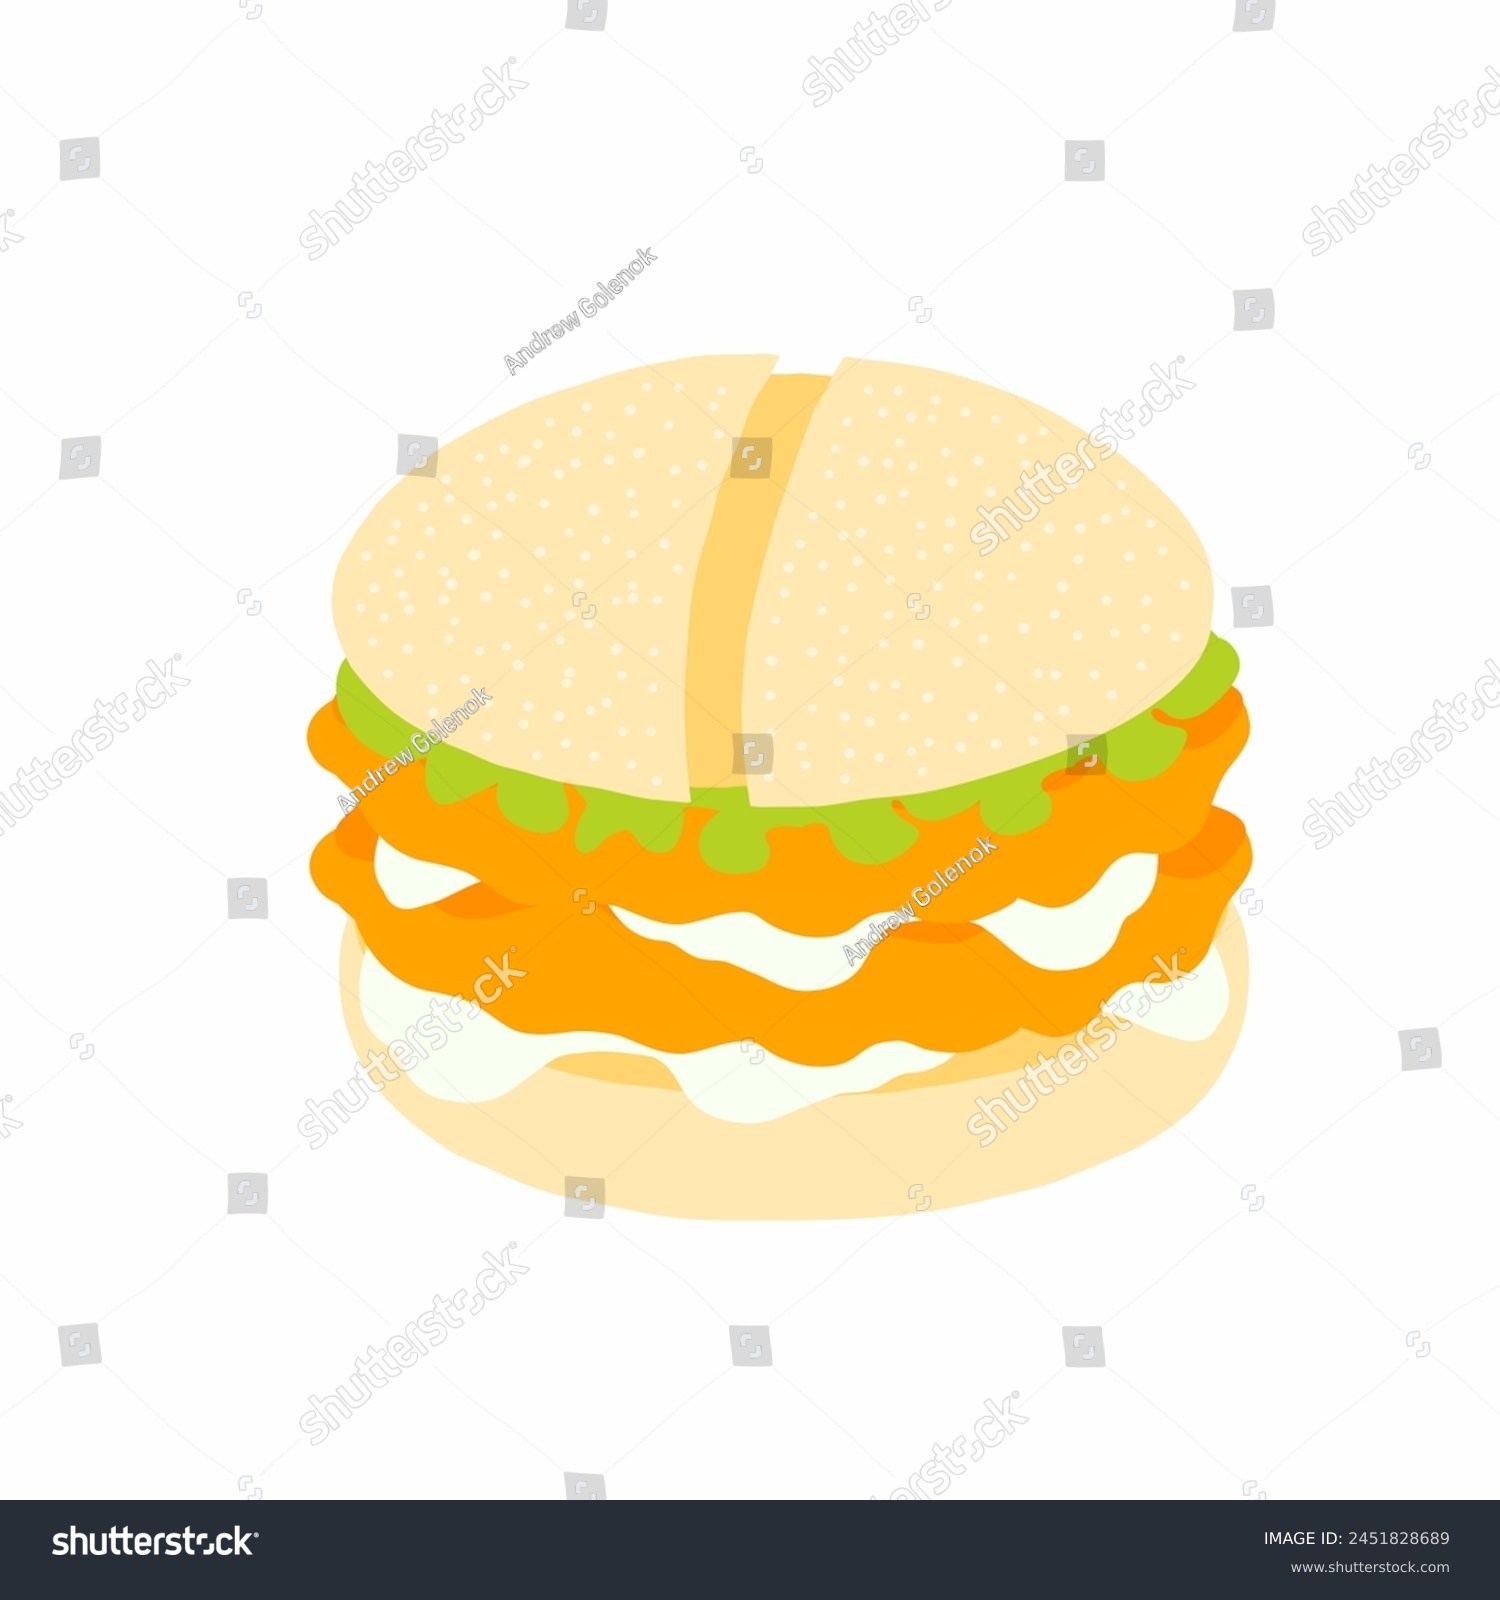 SVG of Burger with wheat bun, double chicken cutlets with sauce and fresh lettuce leaf icon in cartoon flat style. Vector illustration isolated on white background. For menu, poster, infographic, restaurant. svg